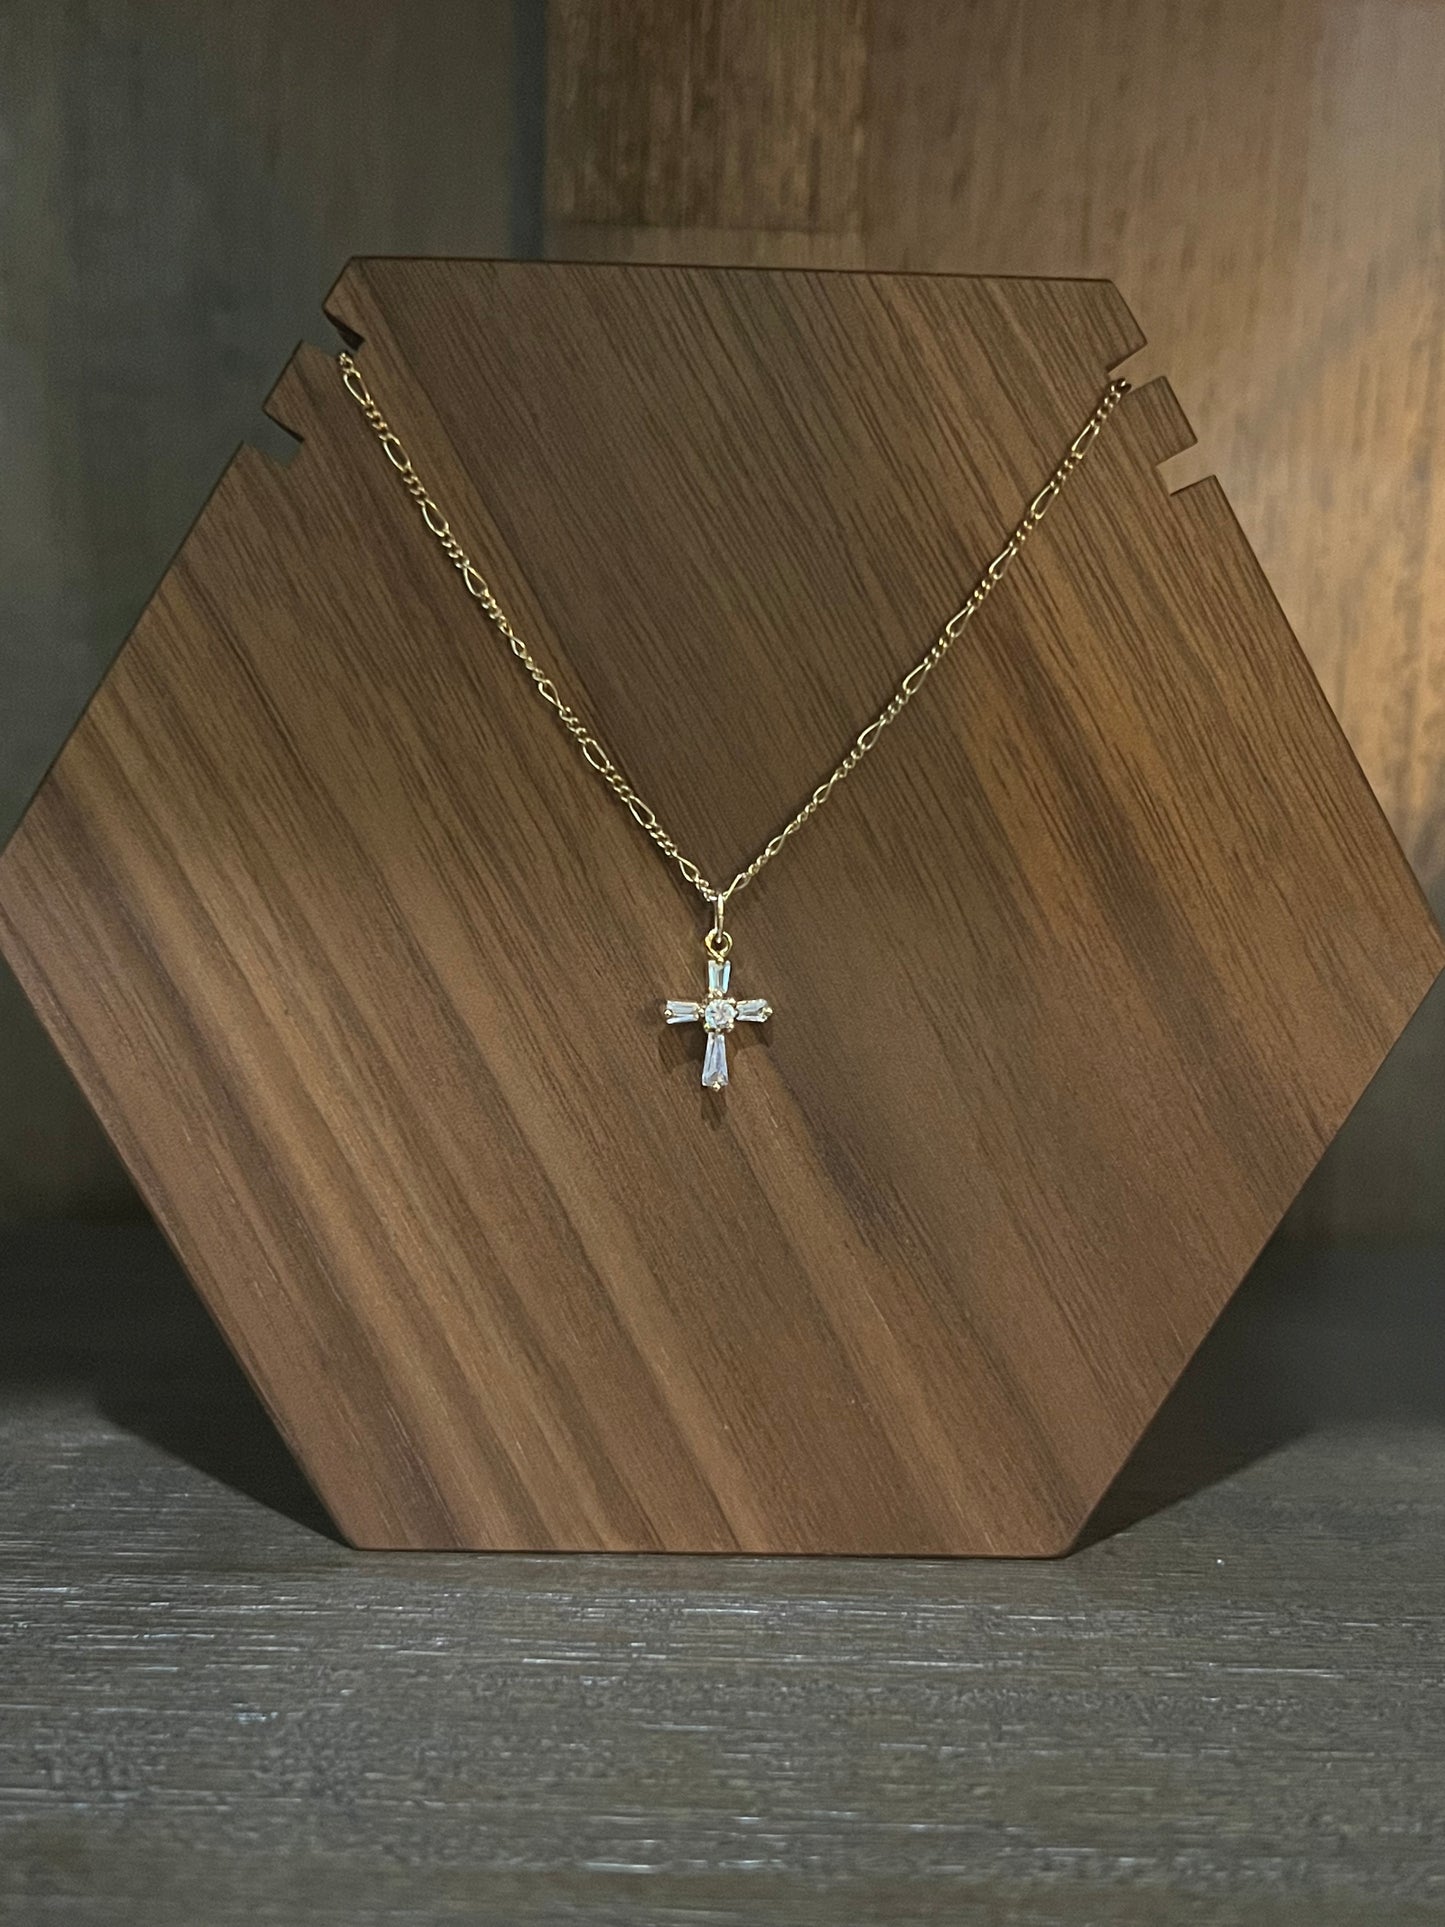 Gold Filled Necklace with cross pendant